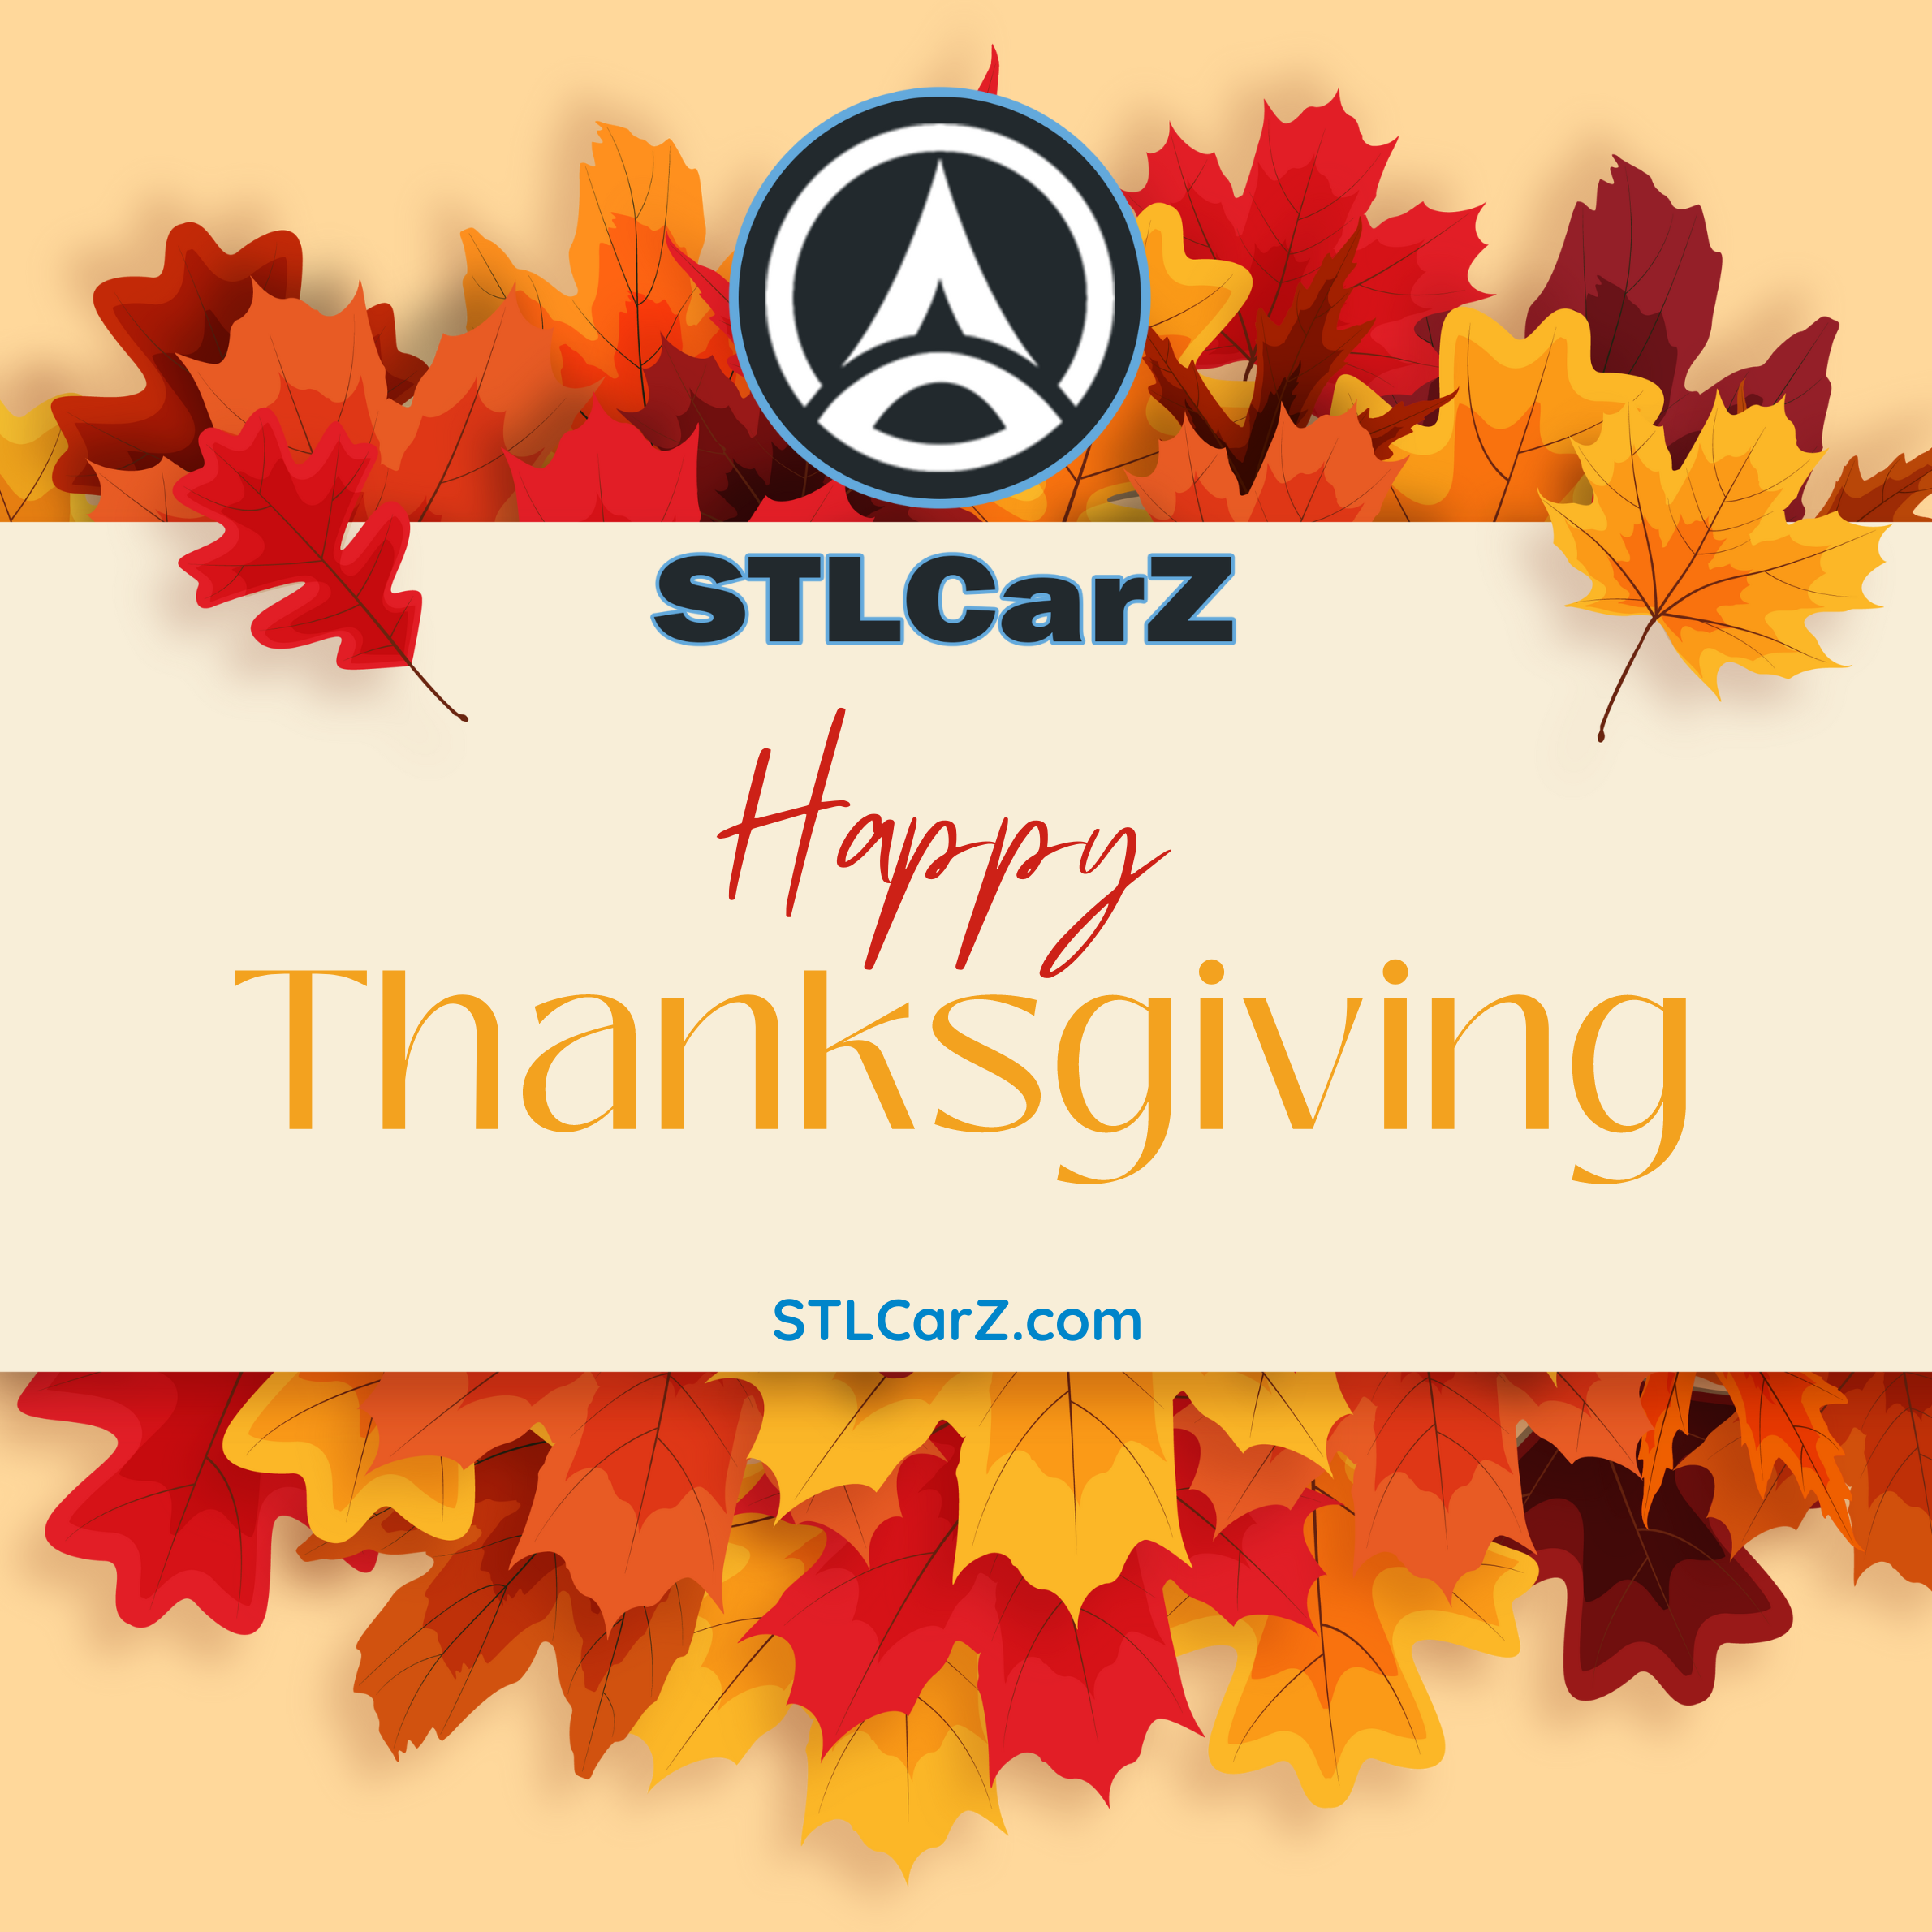 STLCarZ logo with colorful autumn leaves and 'Happy Thanksgiving' greeting on a festive background, visit STLCarZ.com for holiday deals